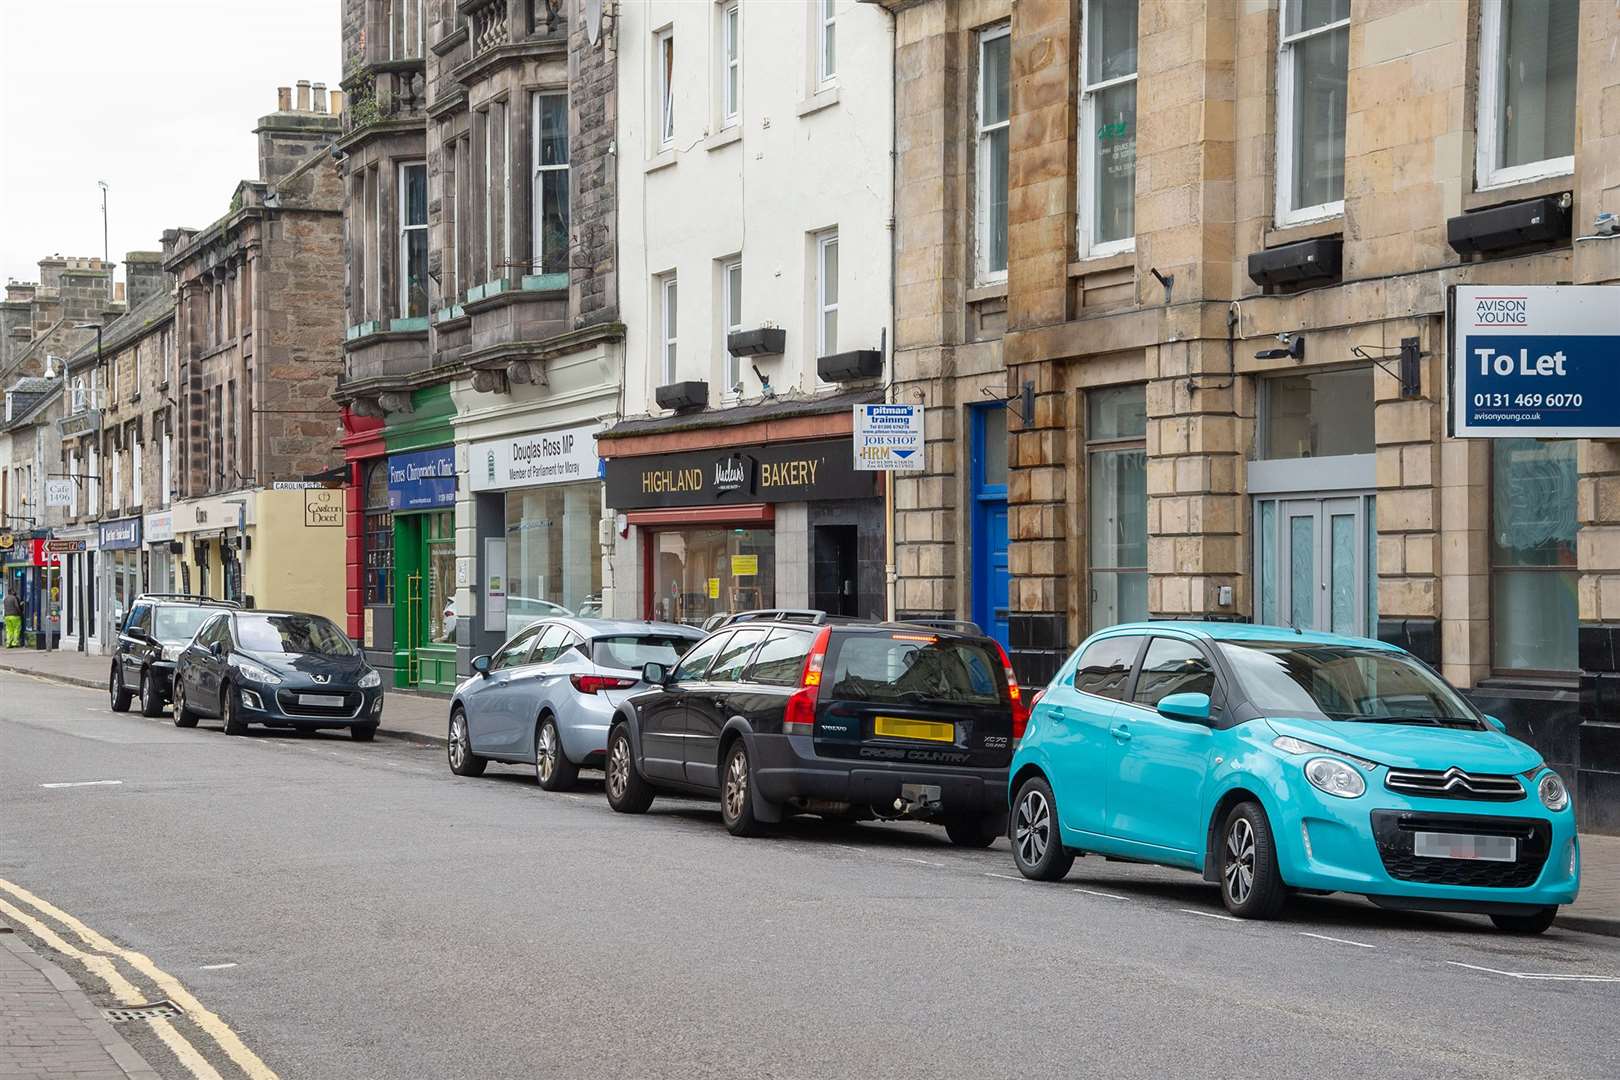 Forres Community Council are also to launch a campaign against shop staff parking on High Street all day.